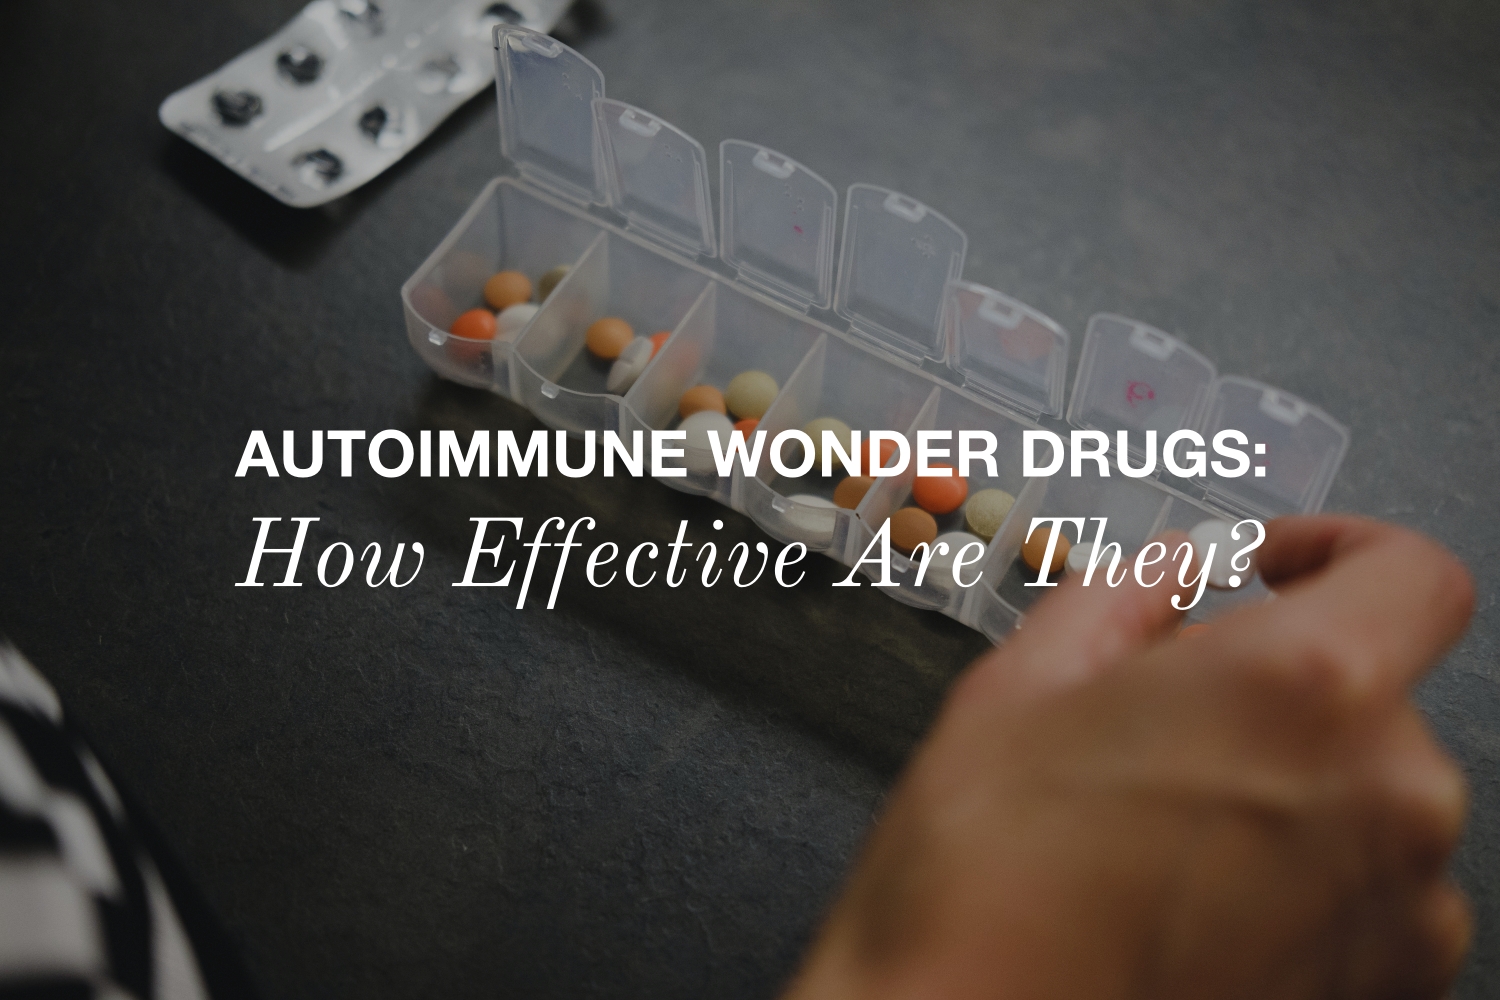 What Your Physician May Not Be Telling You About the Autoimmune Wonder Drugs